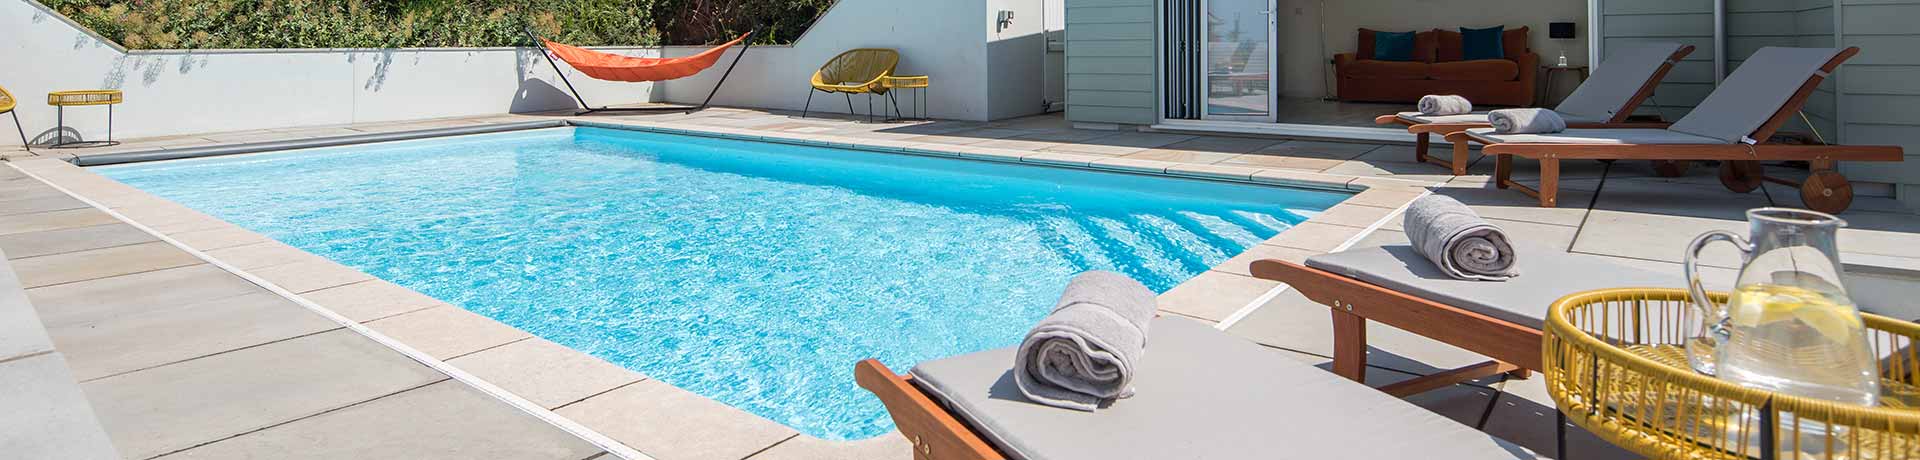 Retreats in Somerset with Outdoor Pools